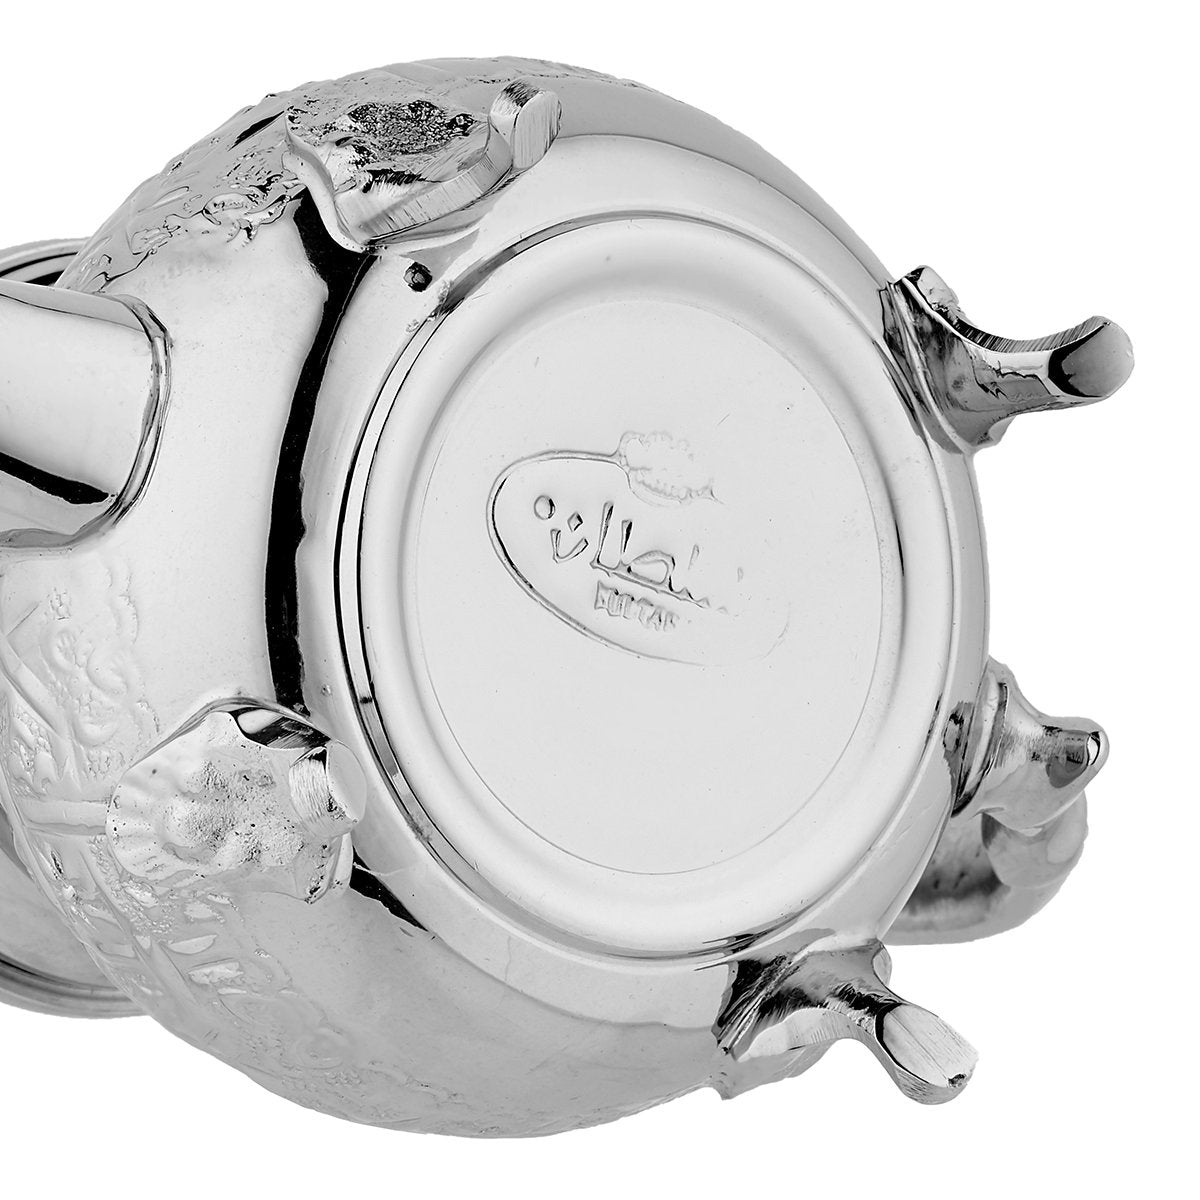 Small Traditional Engraved Moroccan Silver Teapot 300ml